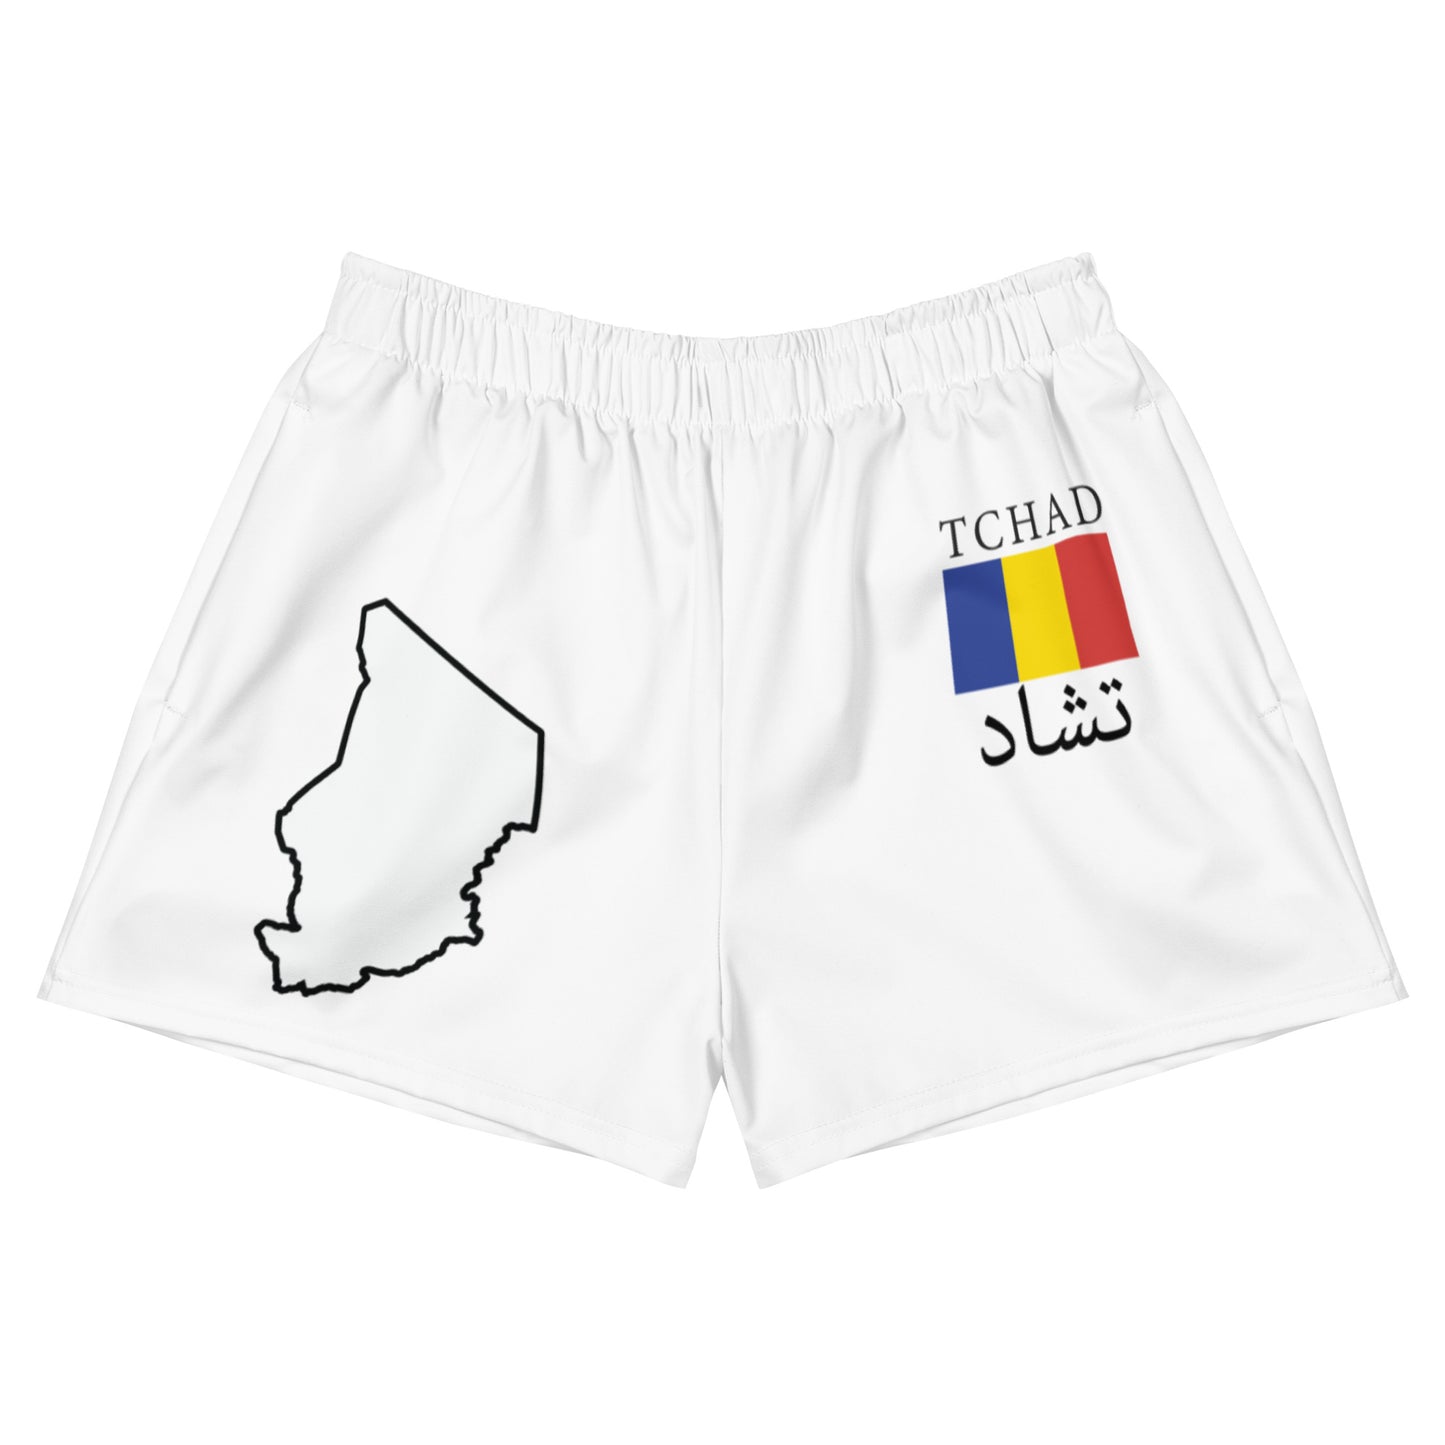 Tchad Map Women’s Recycled Athletic Shorts